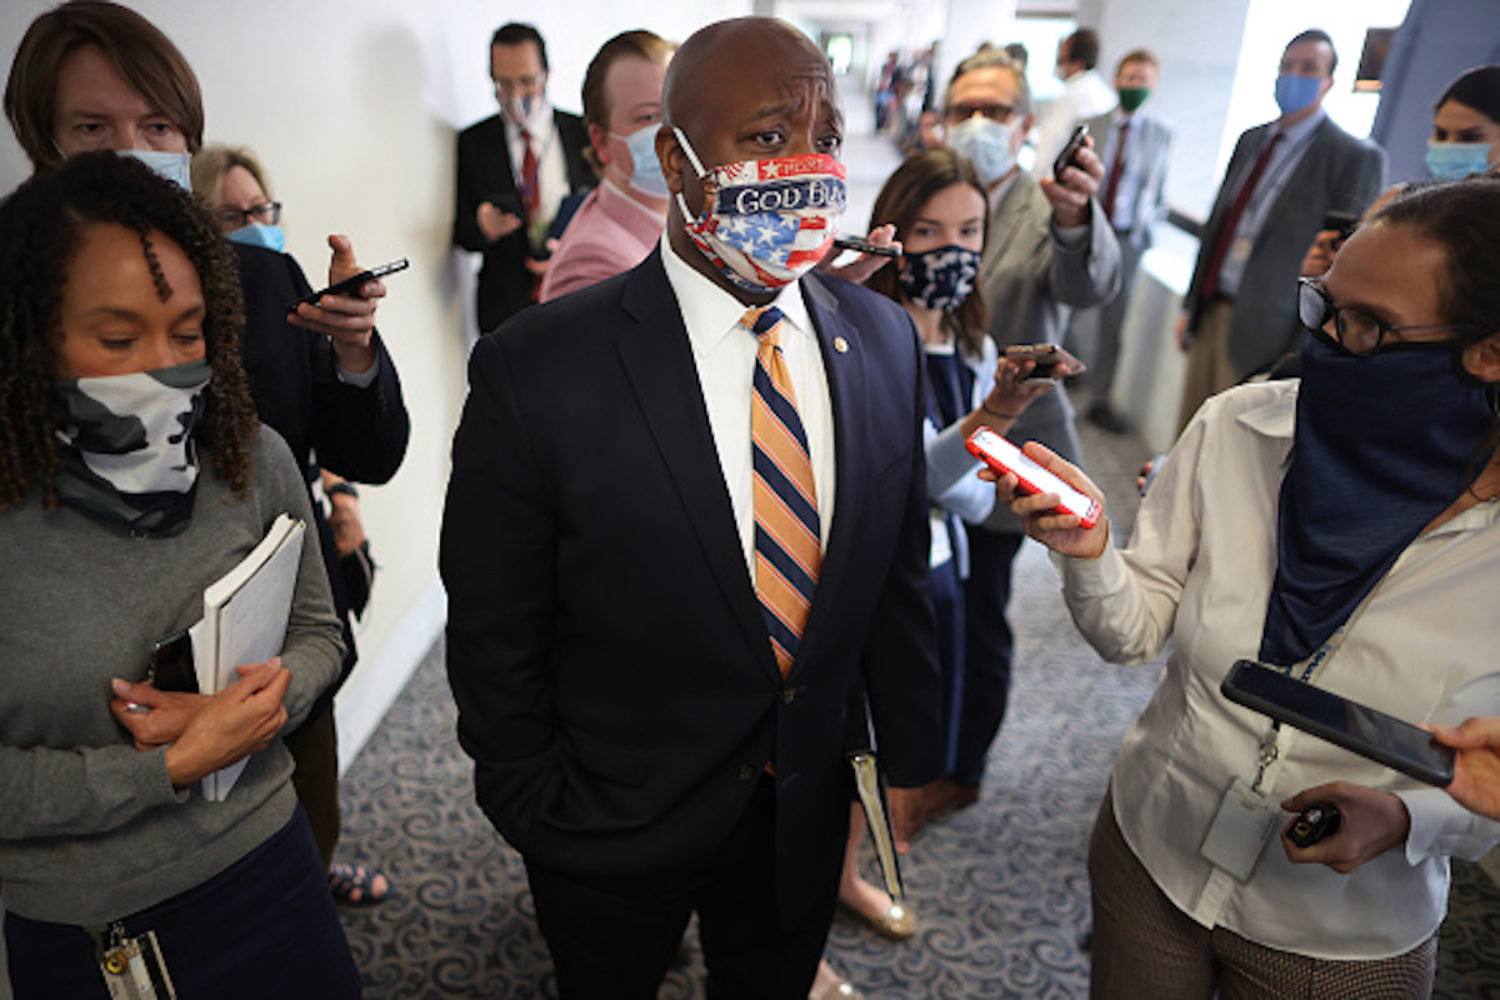 WASHINGTON, DC - JUNE 09: Sen. Tim Scott (R-SC), the only African-American Republican senator, talks to reporters following the weekly Senate Republican policy luncheon in the Hart Senate Office Building on Capitol Hill June 09, 2020 in Washington, DC. As a response to the recent killings of unarmed black people by police, Democrats from the House and Senate introduced legislation Monday that would change the way law enforcement officers operate, use deadly force and be held accountable for wrongdoing. President Donald Trump opposes the legislation and it is unclear if Republicans will take up the measure in the Senate. (Photo by Chip Somodevilla/Getty Images)